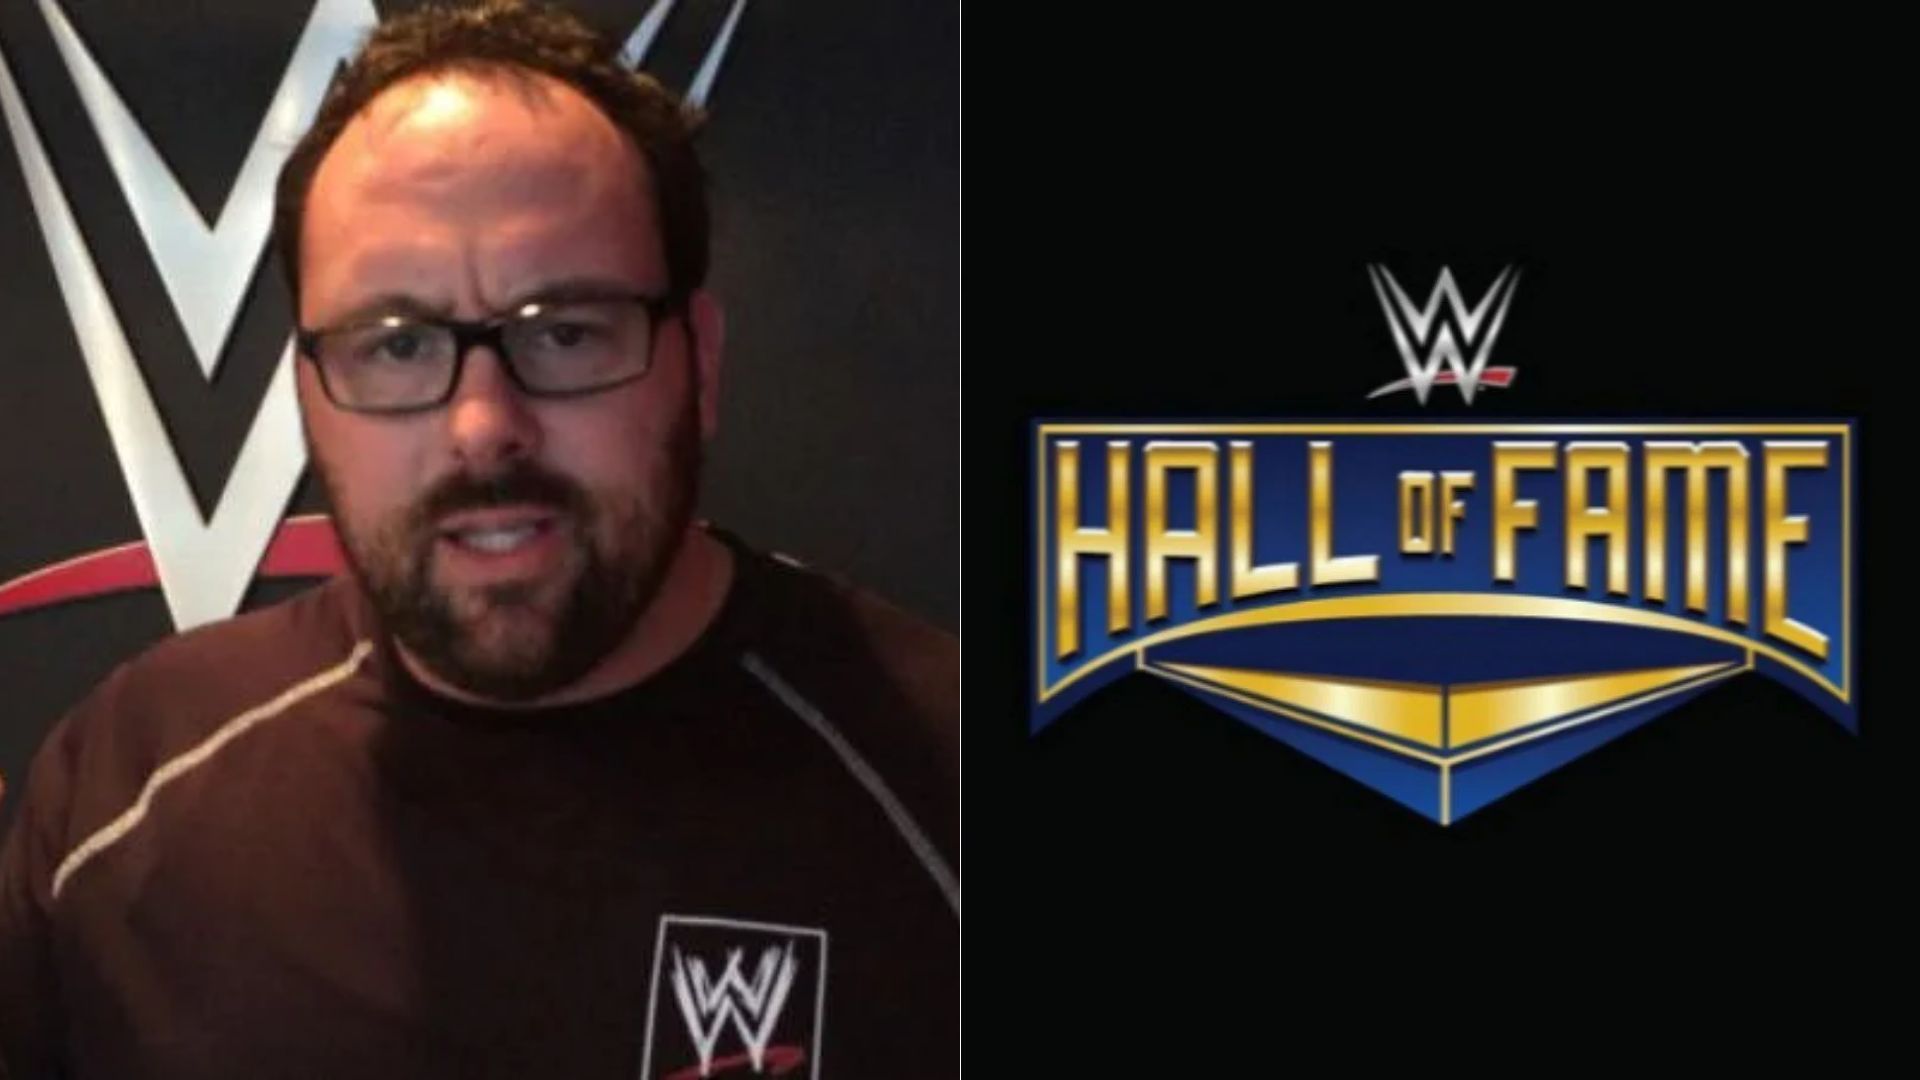 Eugene has never been inducted into the WWE Hall of Fame.